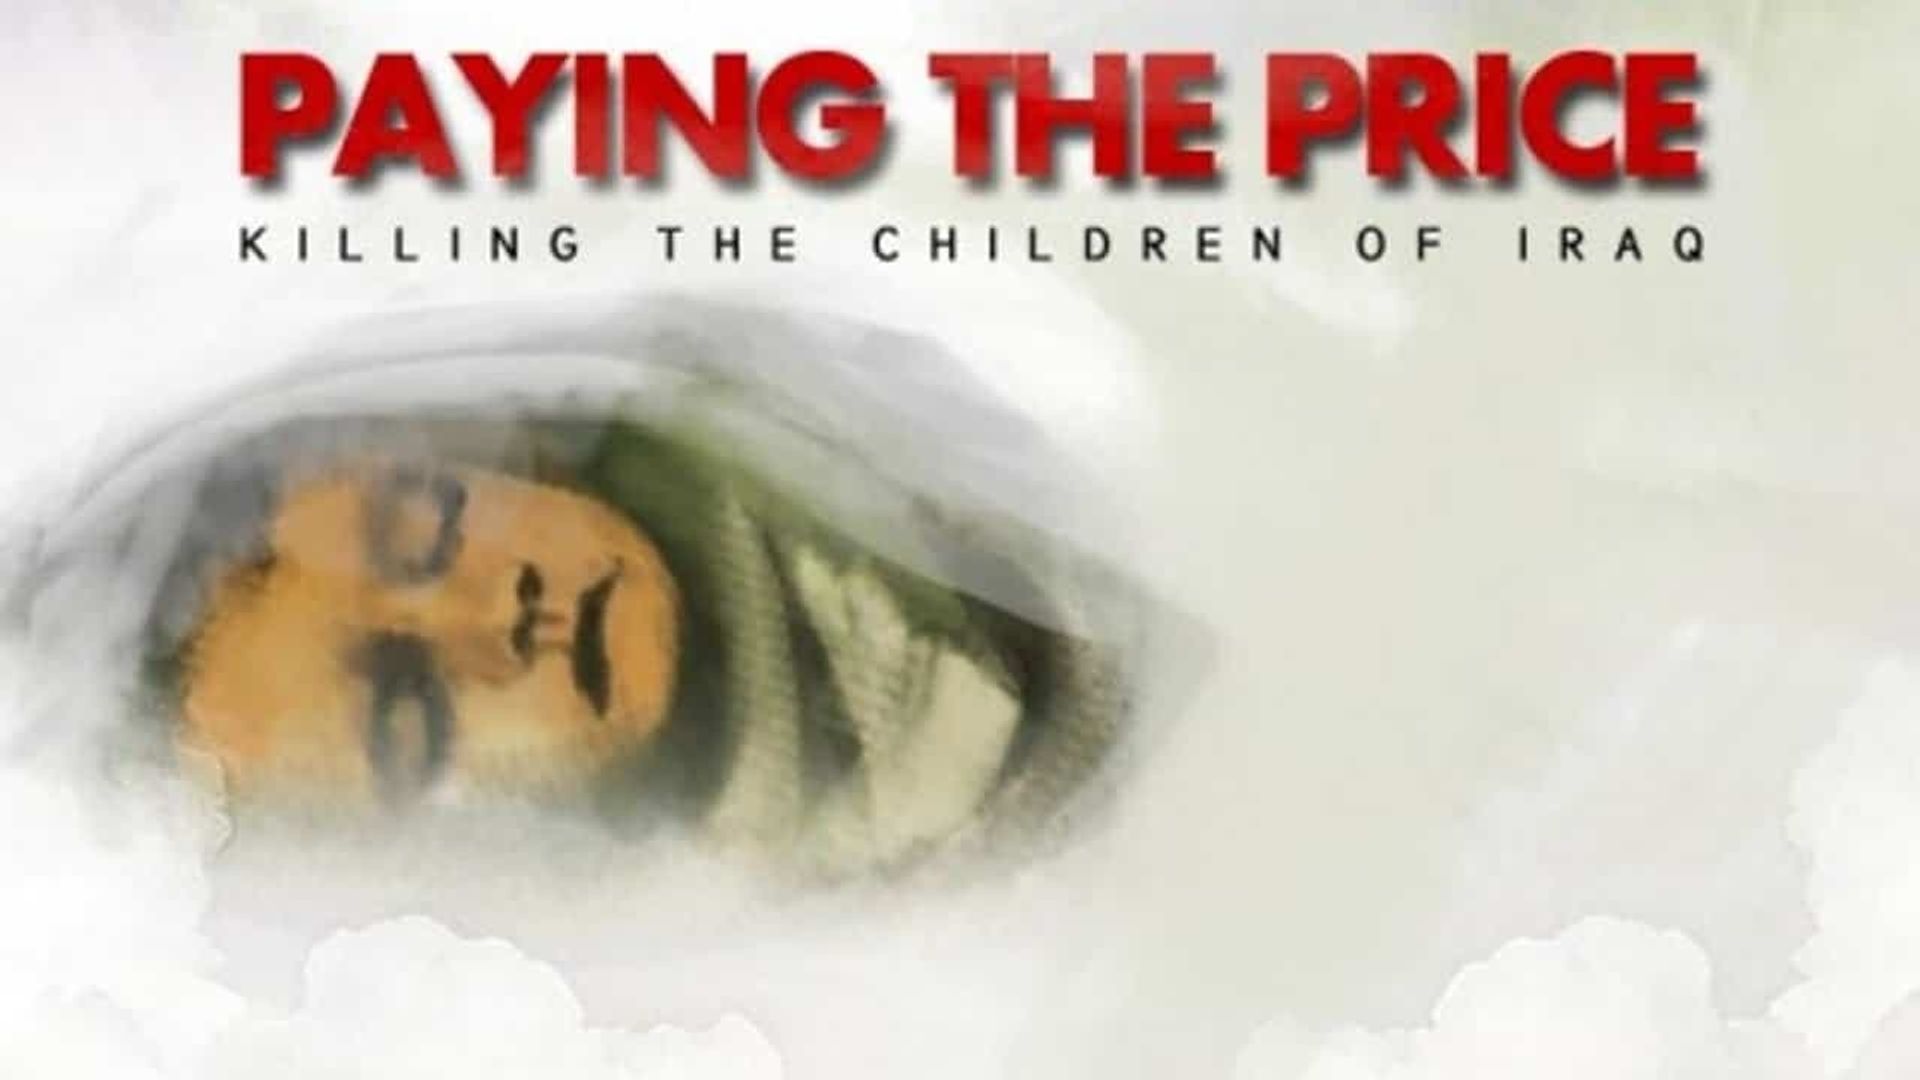 Paying the Price: Killing the Children of Iraq background